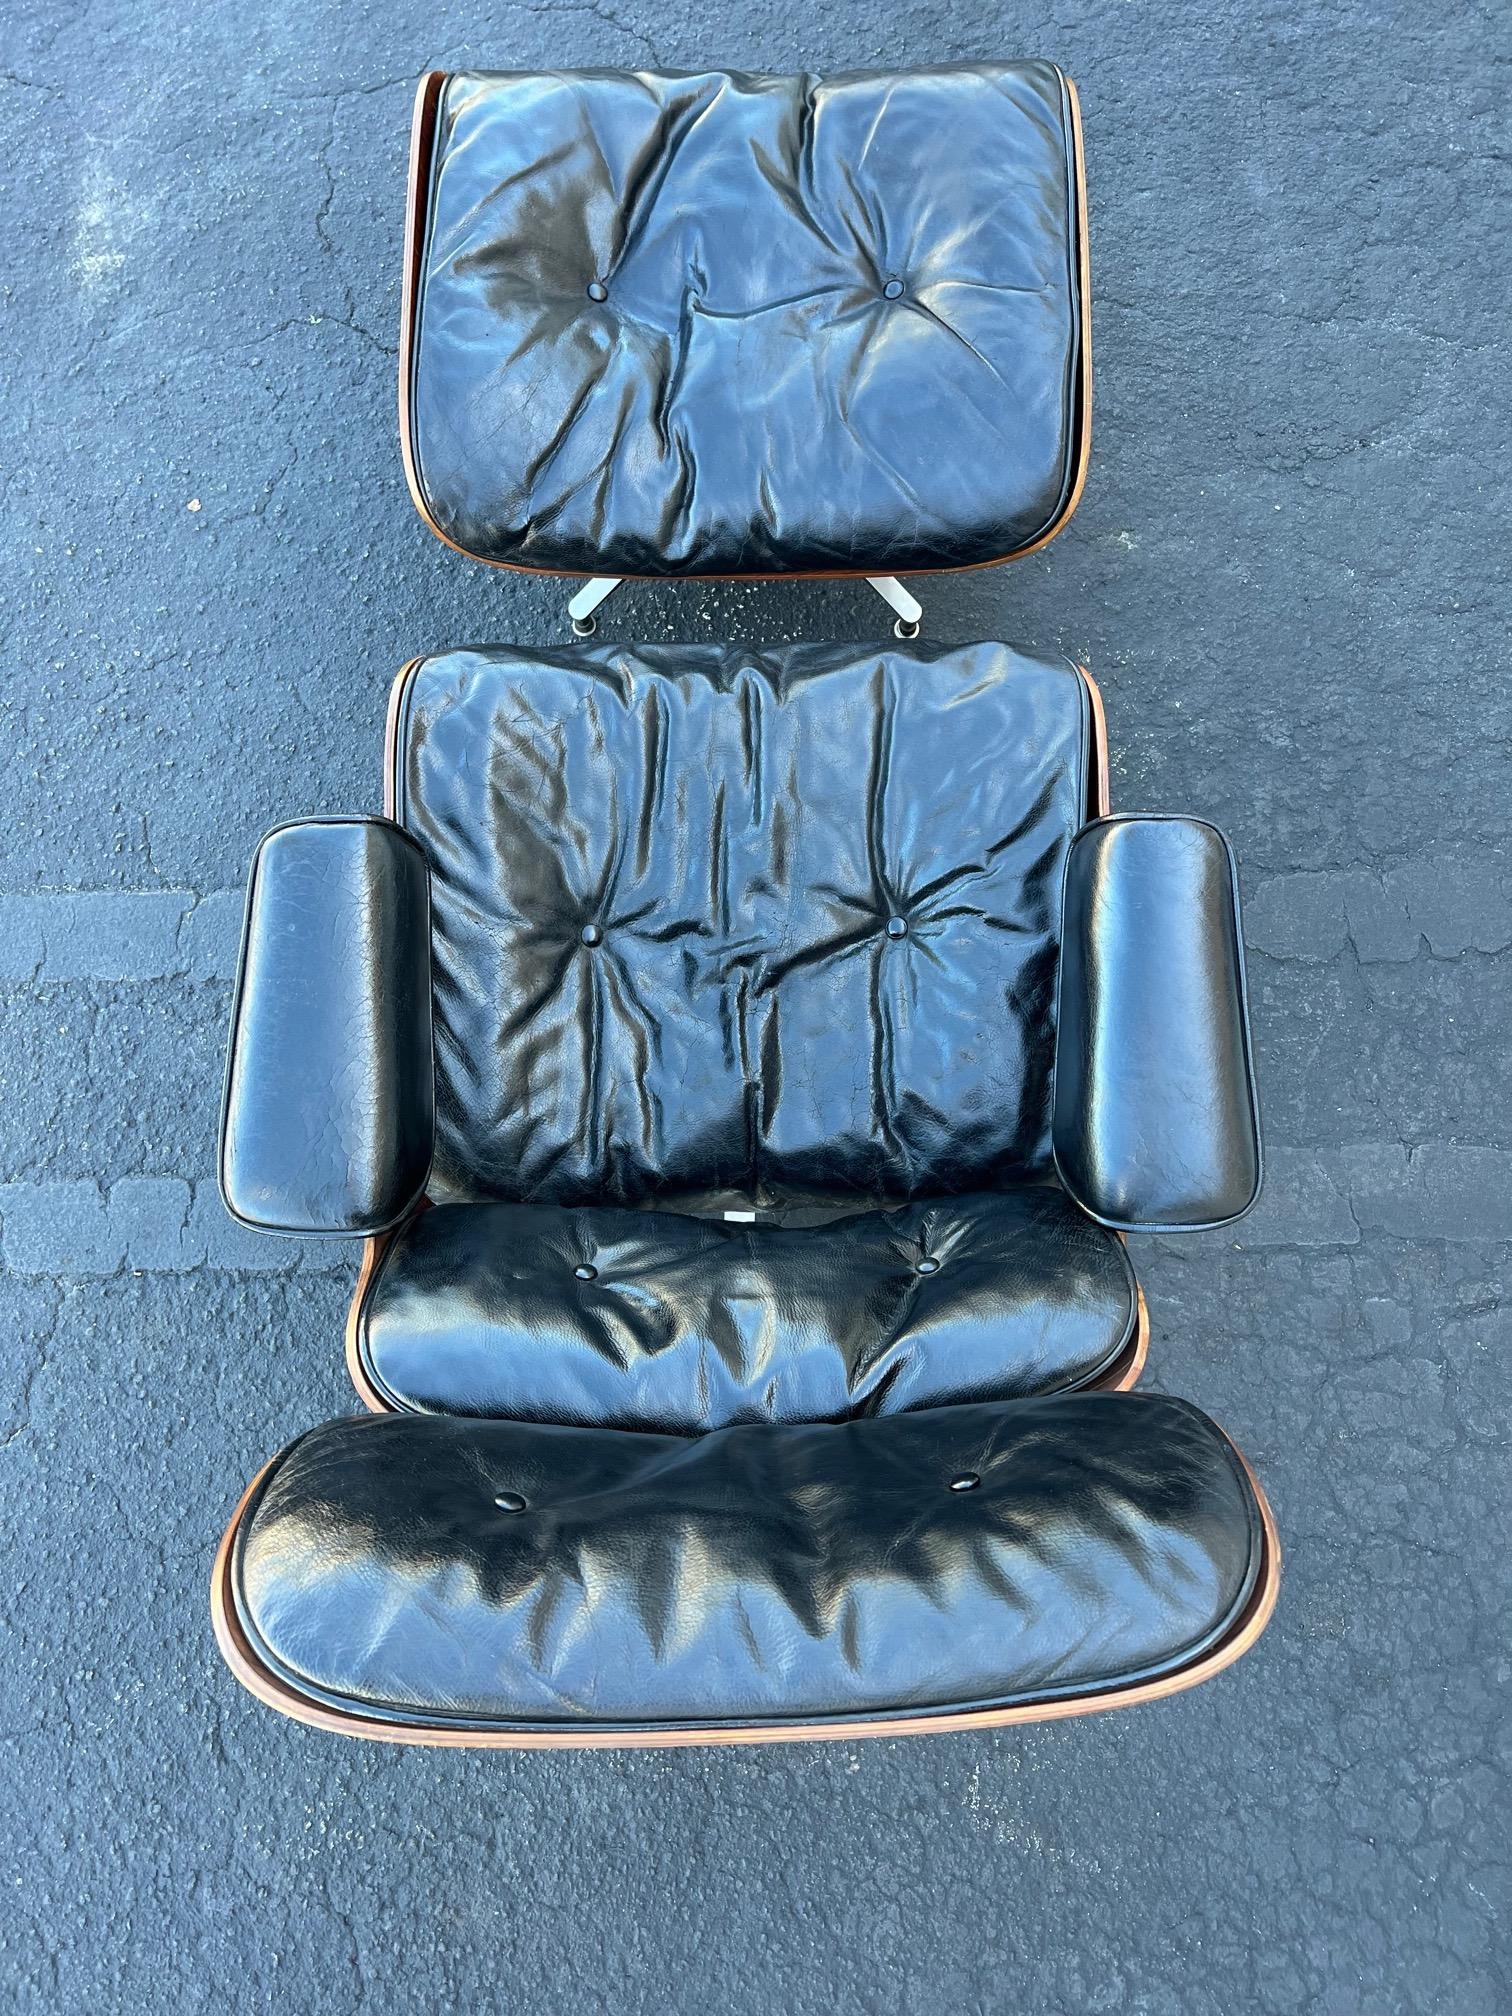 Original Charles Eames Herman Miller Lounge Chair and Ottoman 1959 For Sale 7